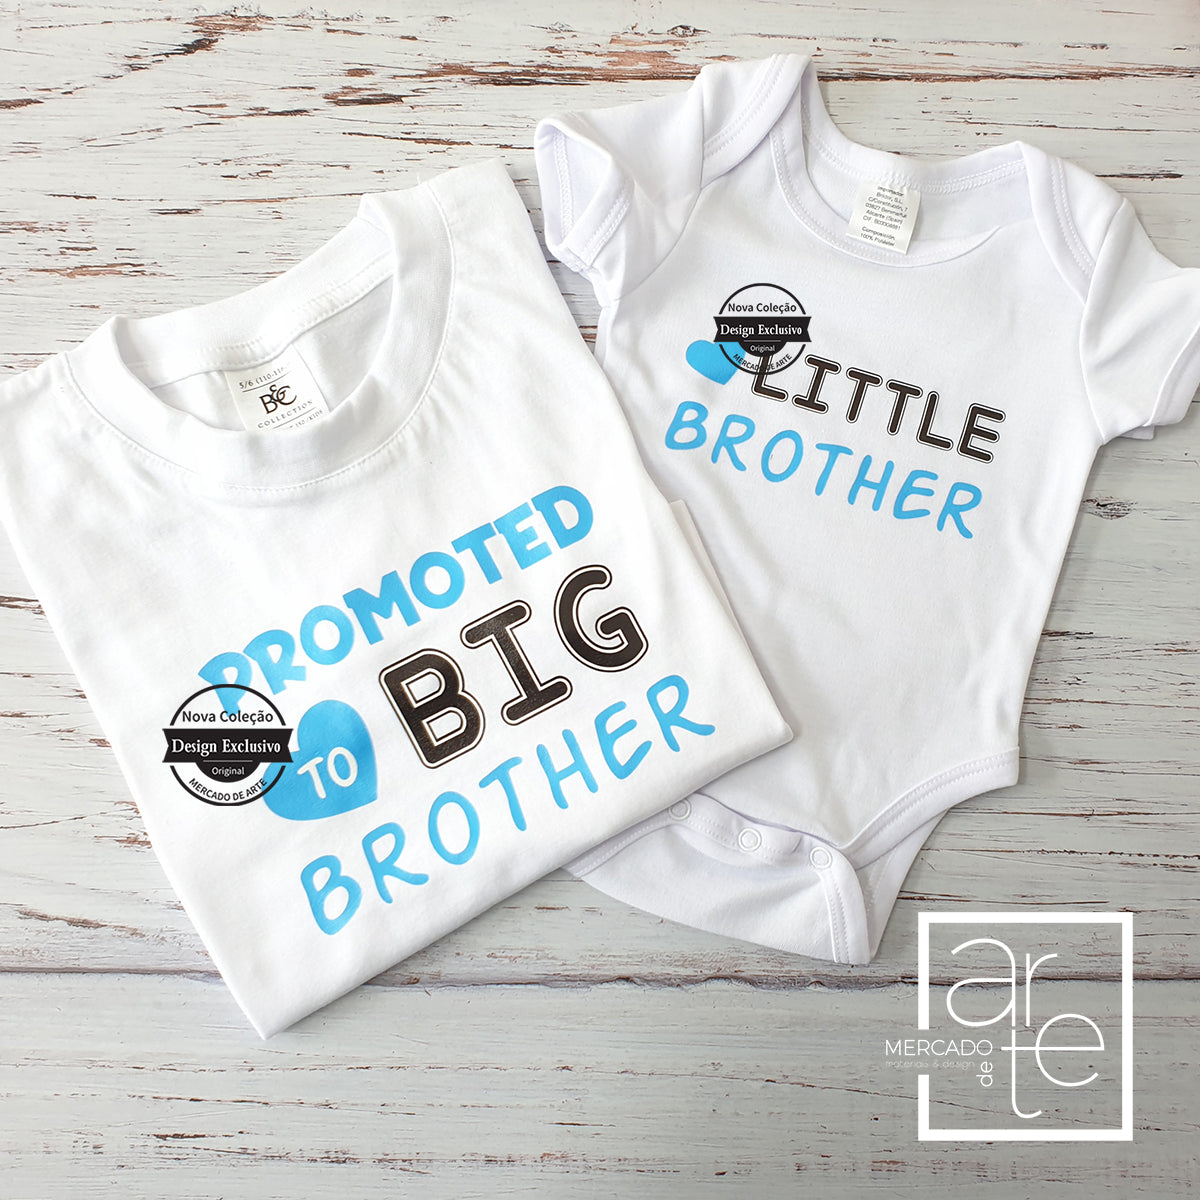 Conjunto body e/ou T-shirt "Promoted to Big Brother"